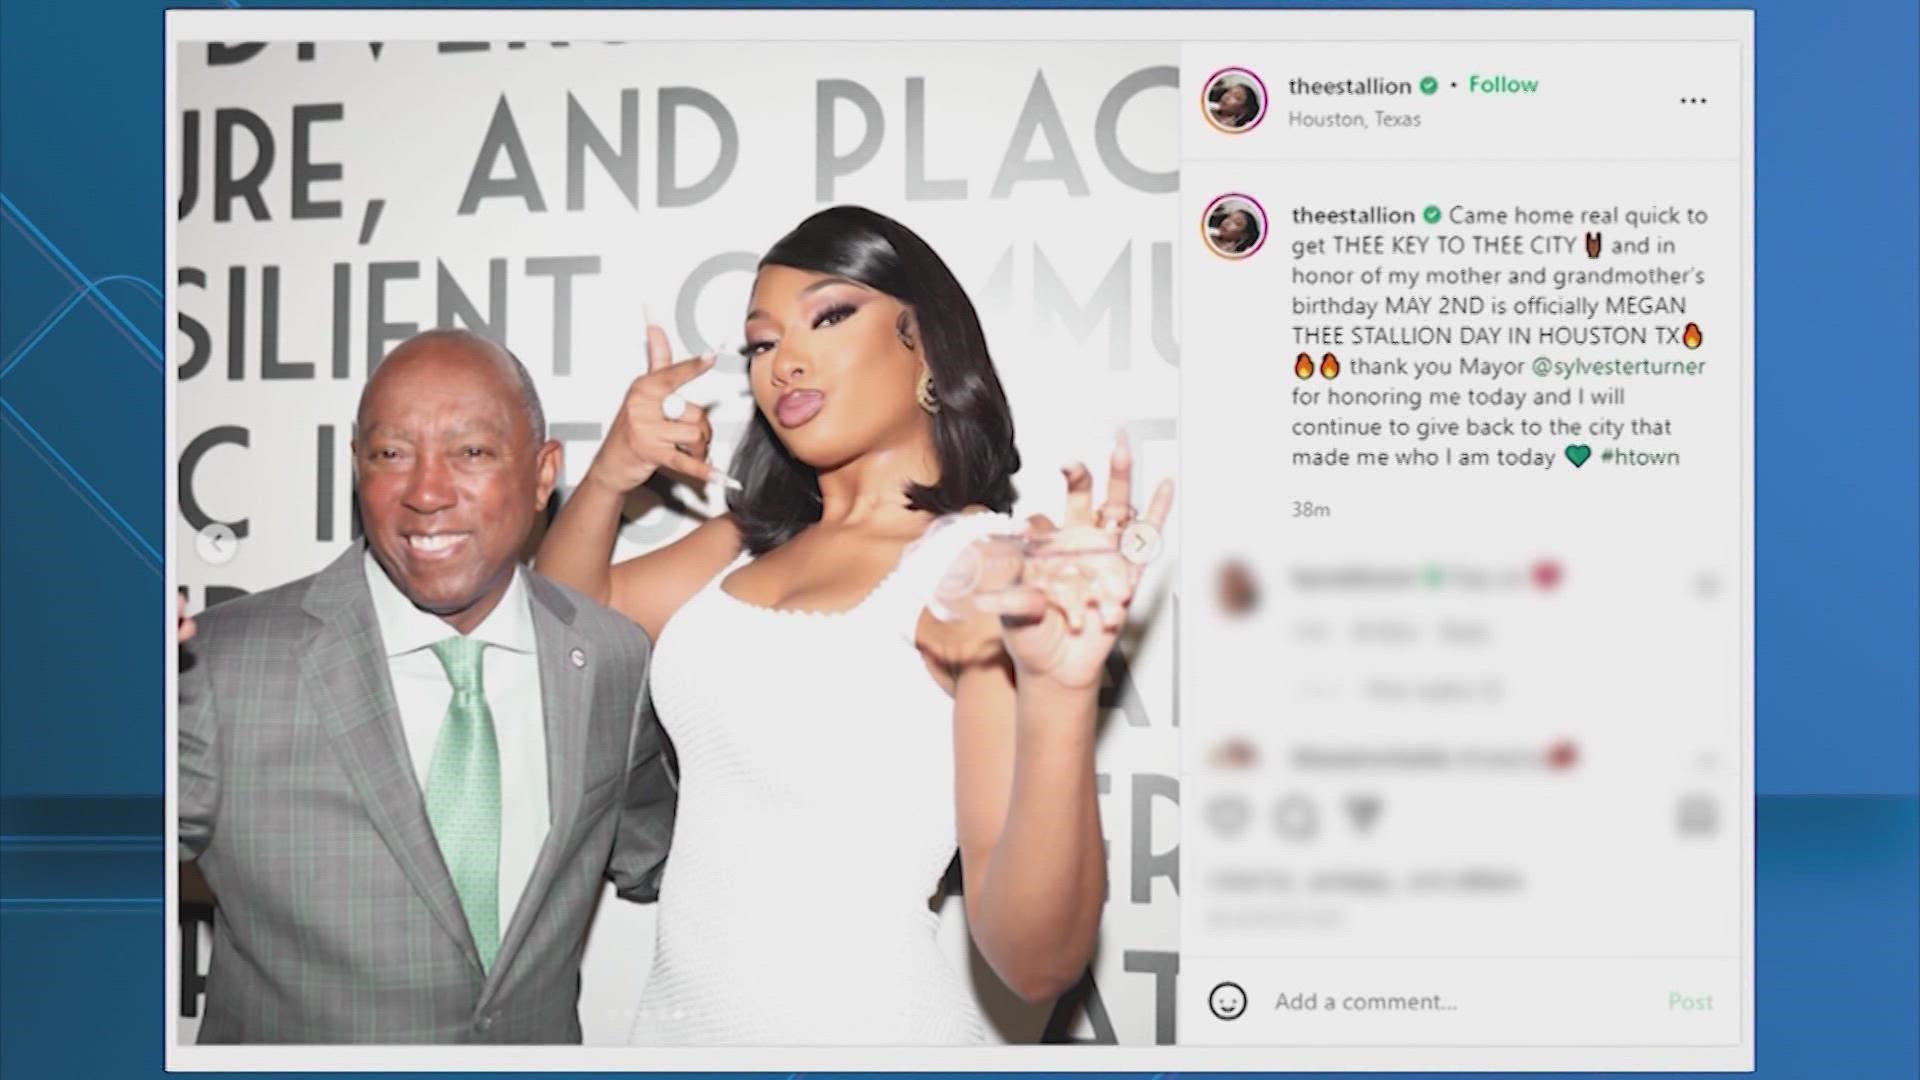 Mayor Turner gave the rapper a key to the city and officially declared 5/2/2022 as Megan The Stallion Day in Houston.